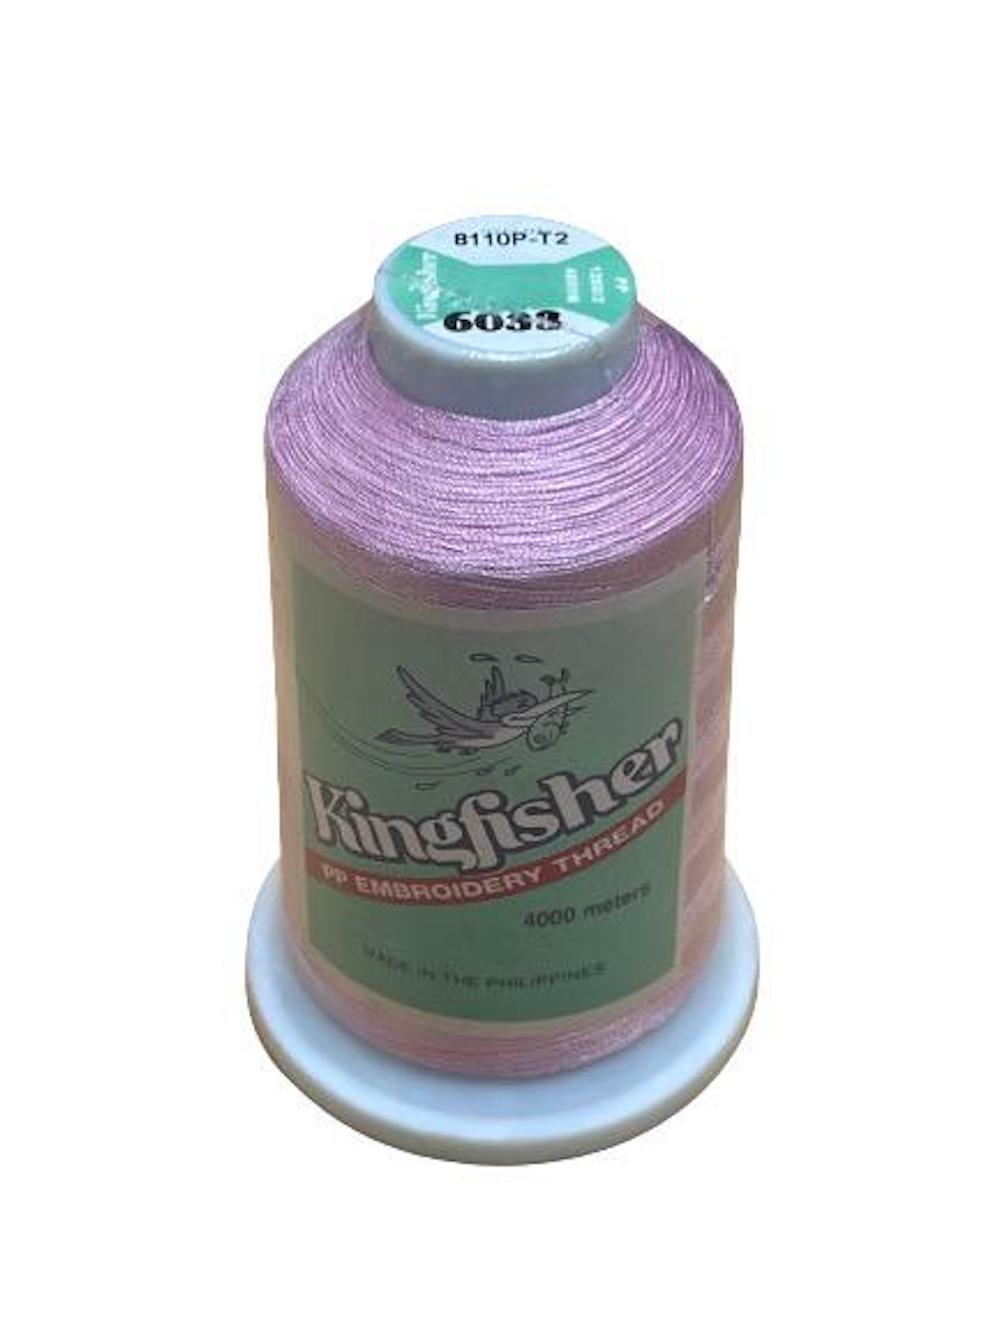 King Fisher Embroidery Thread 4000m 6033 - MY SEWING MALL